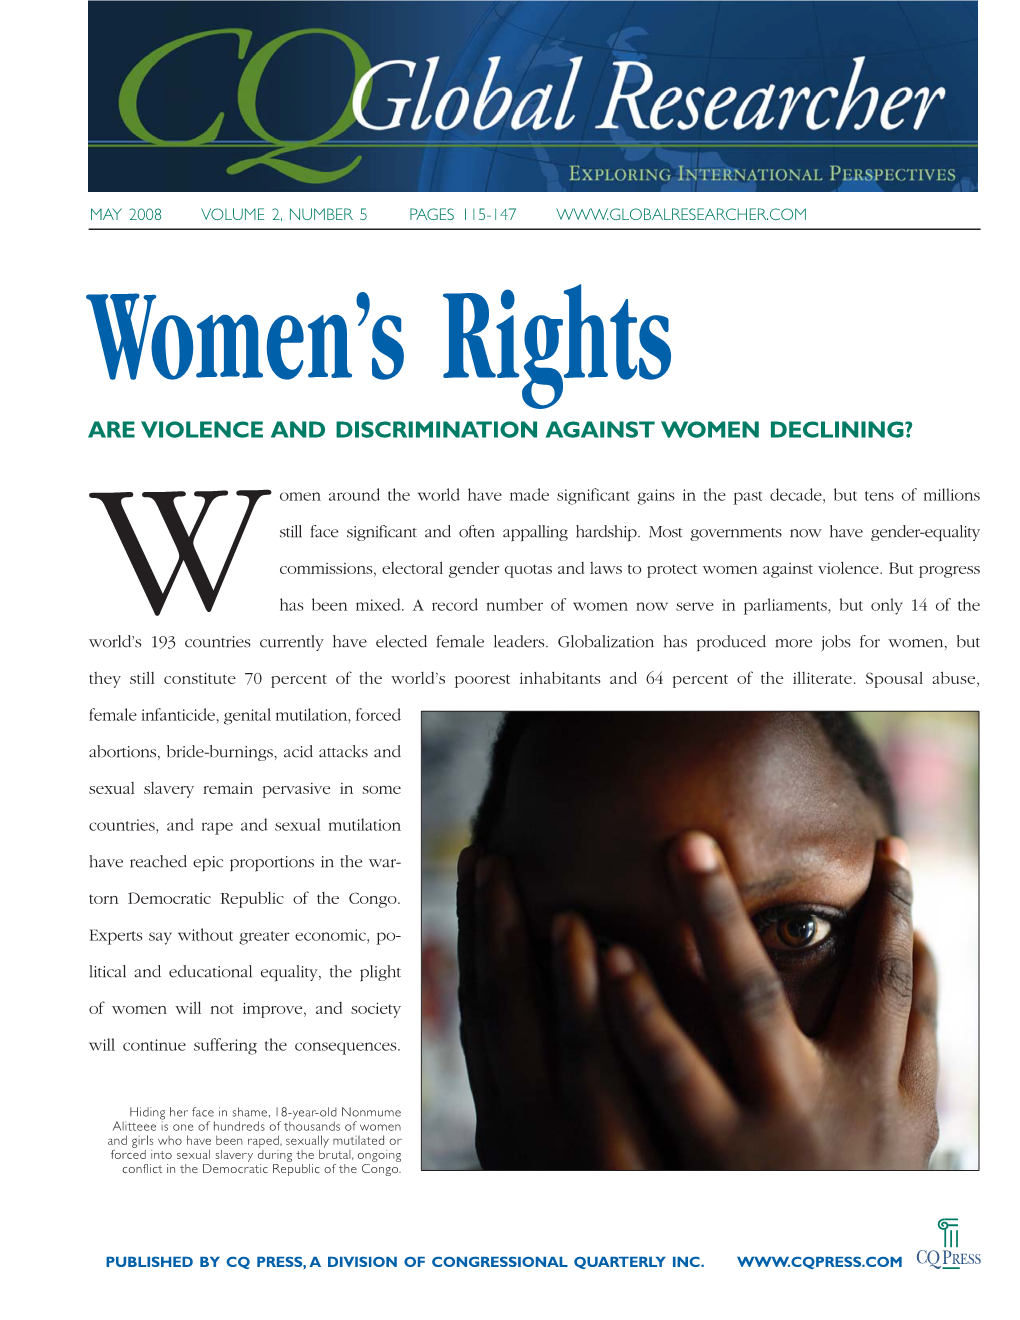 Women's Rights: Are Violence and Discrimination Against Women